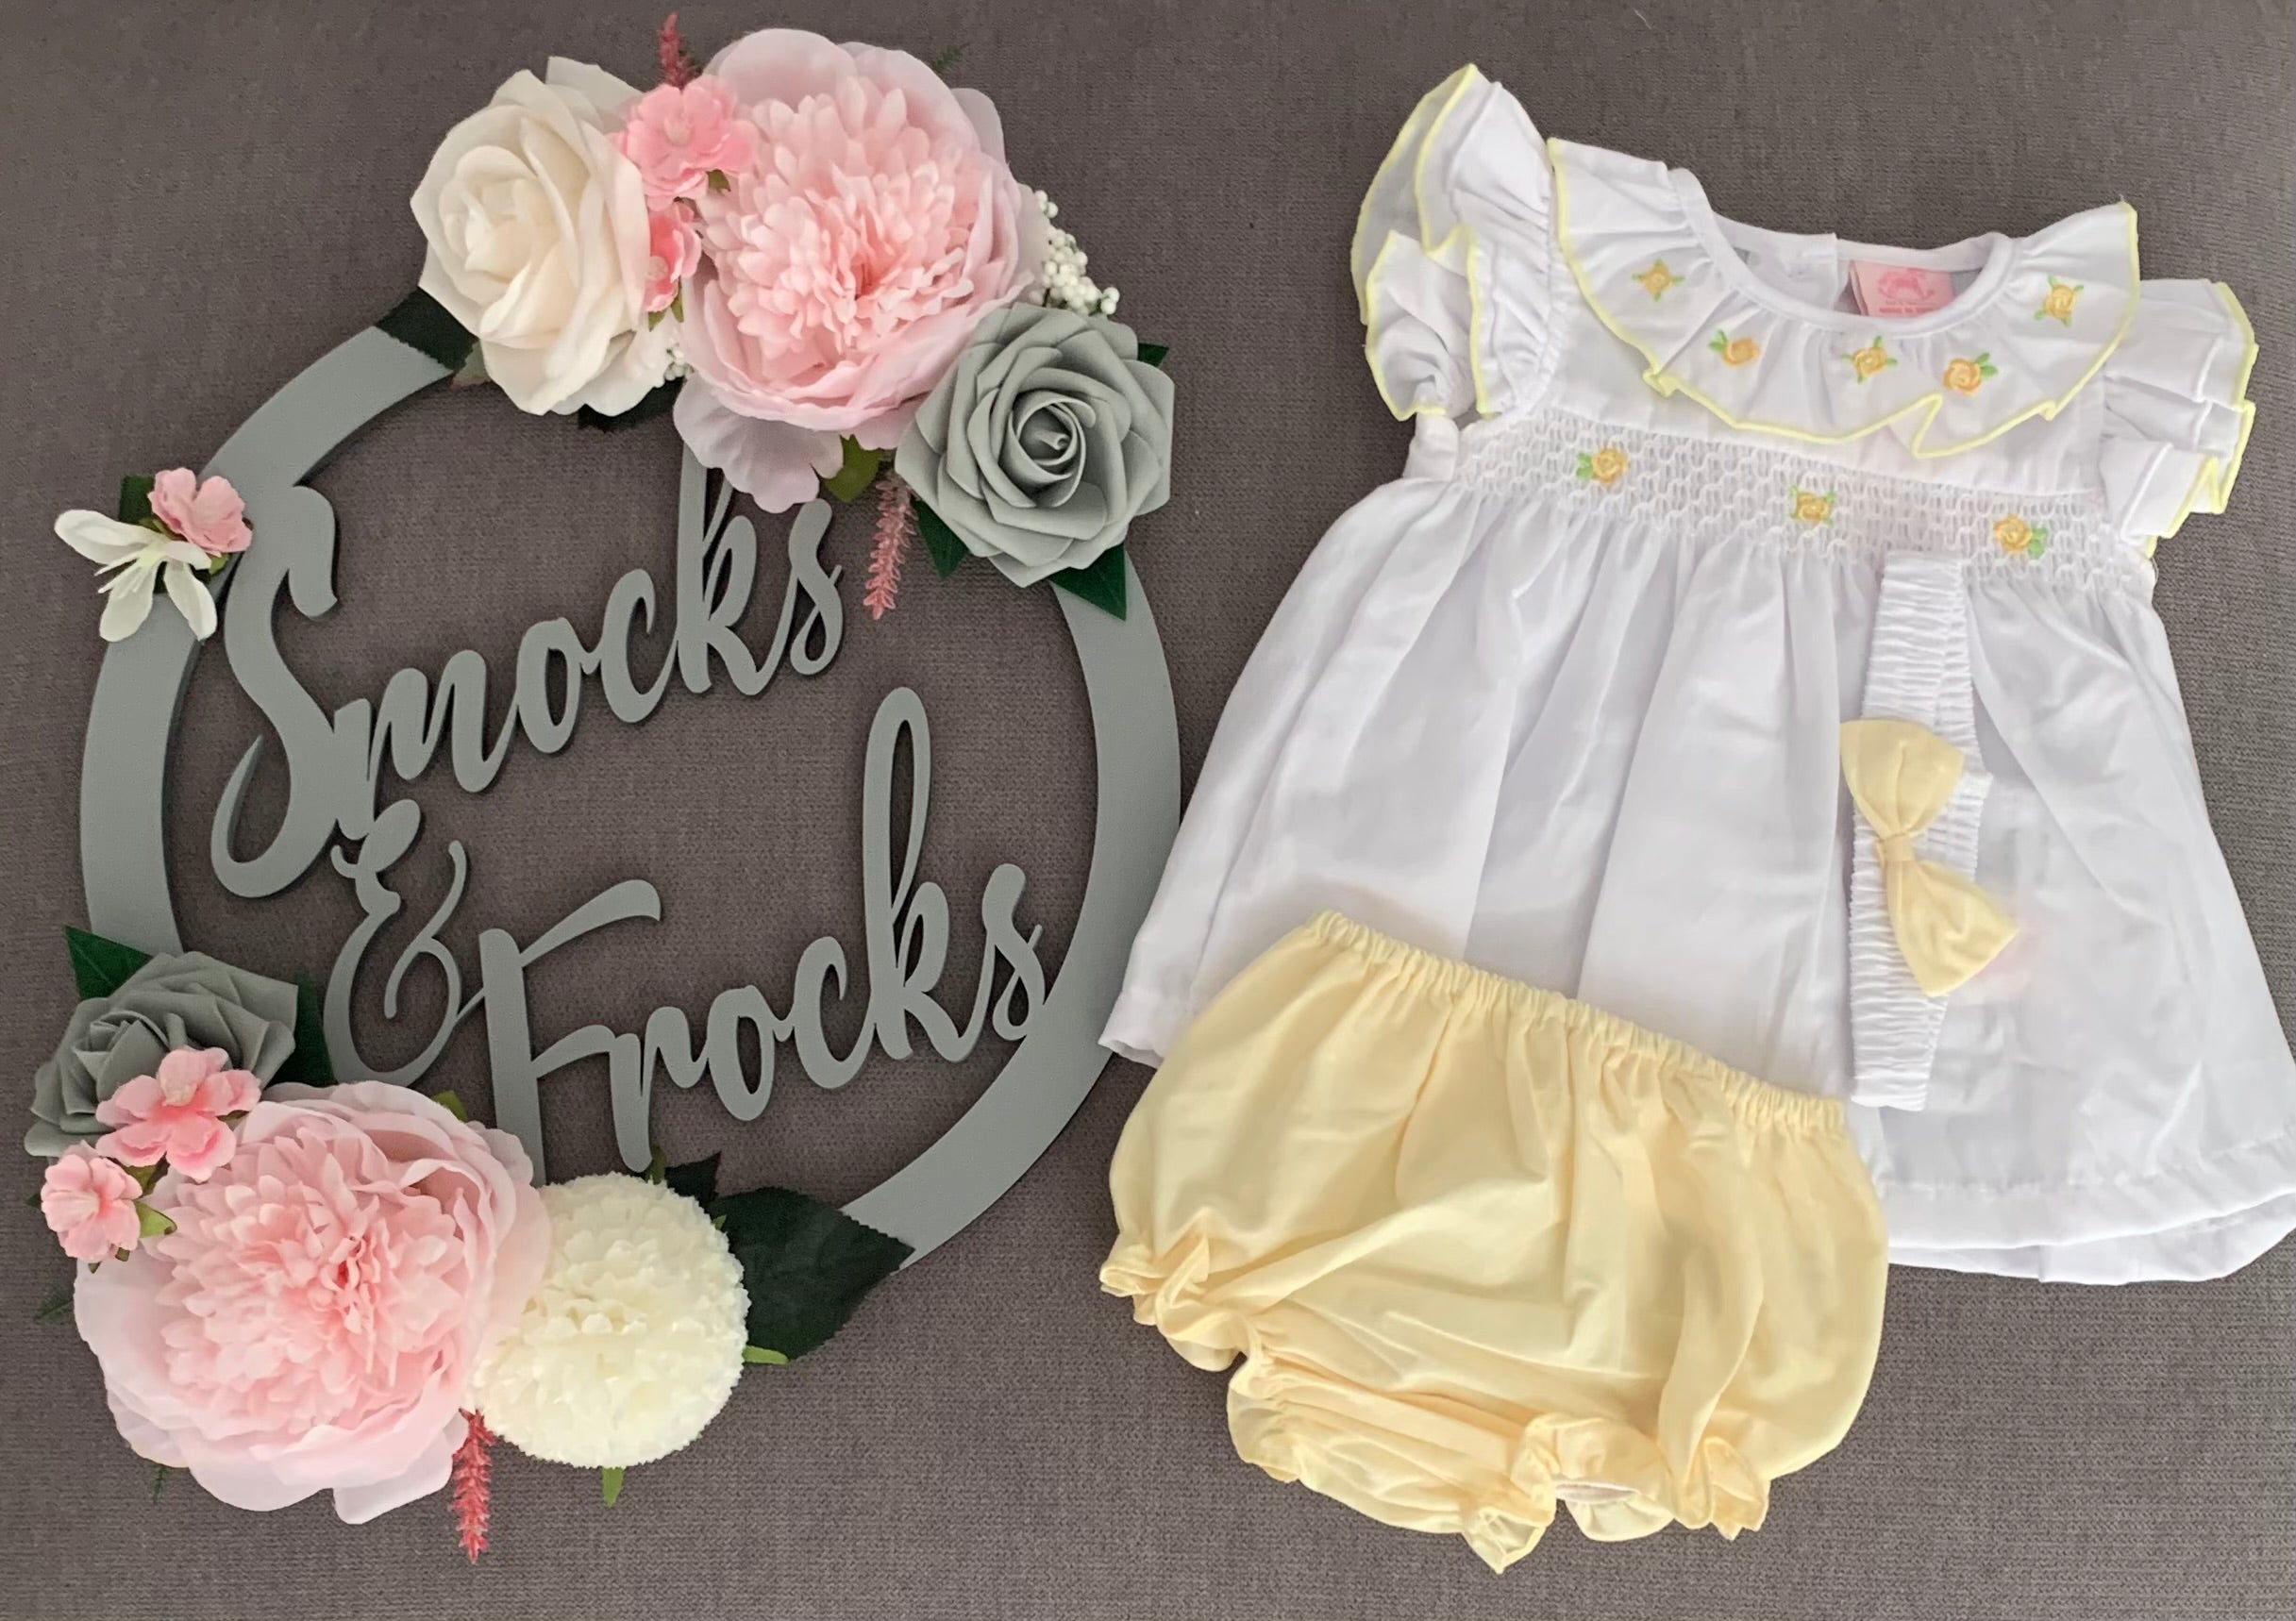 Rose and Smocked Detail Dress with Bow Headband - D06367A